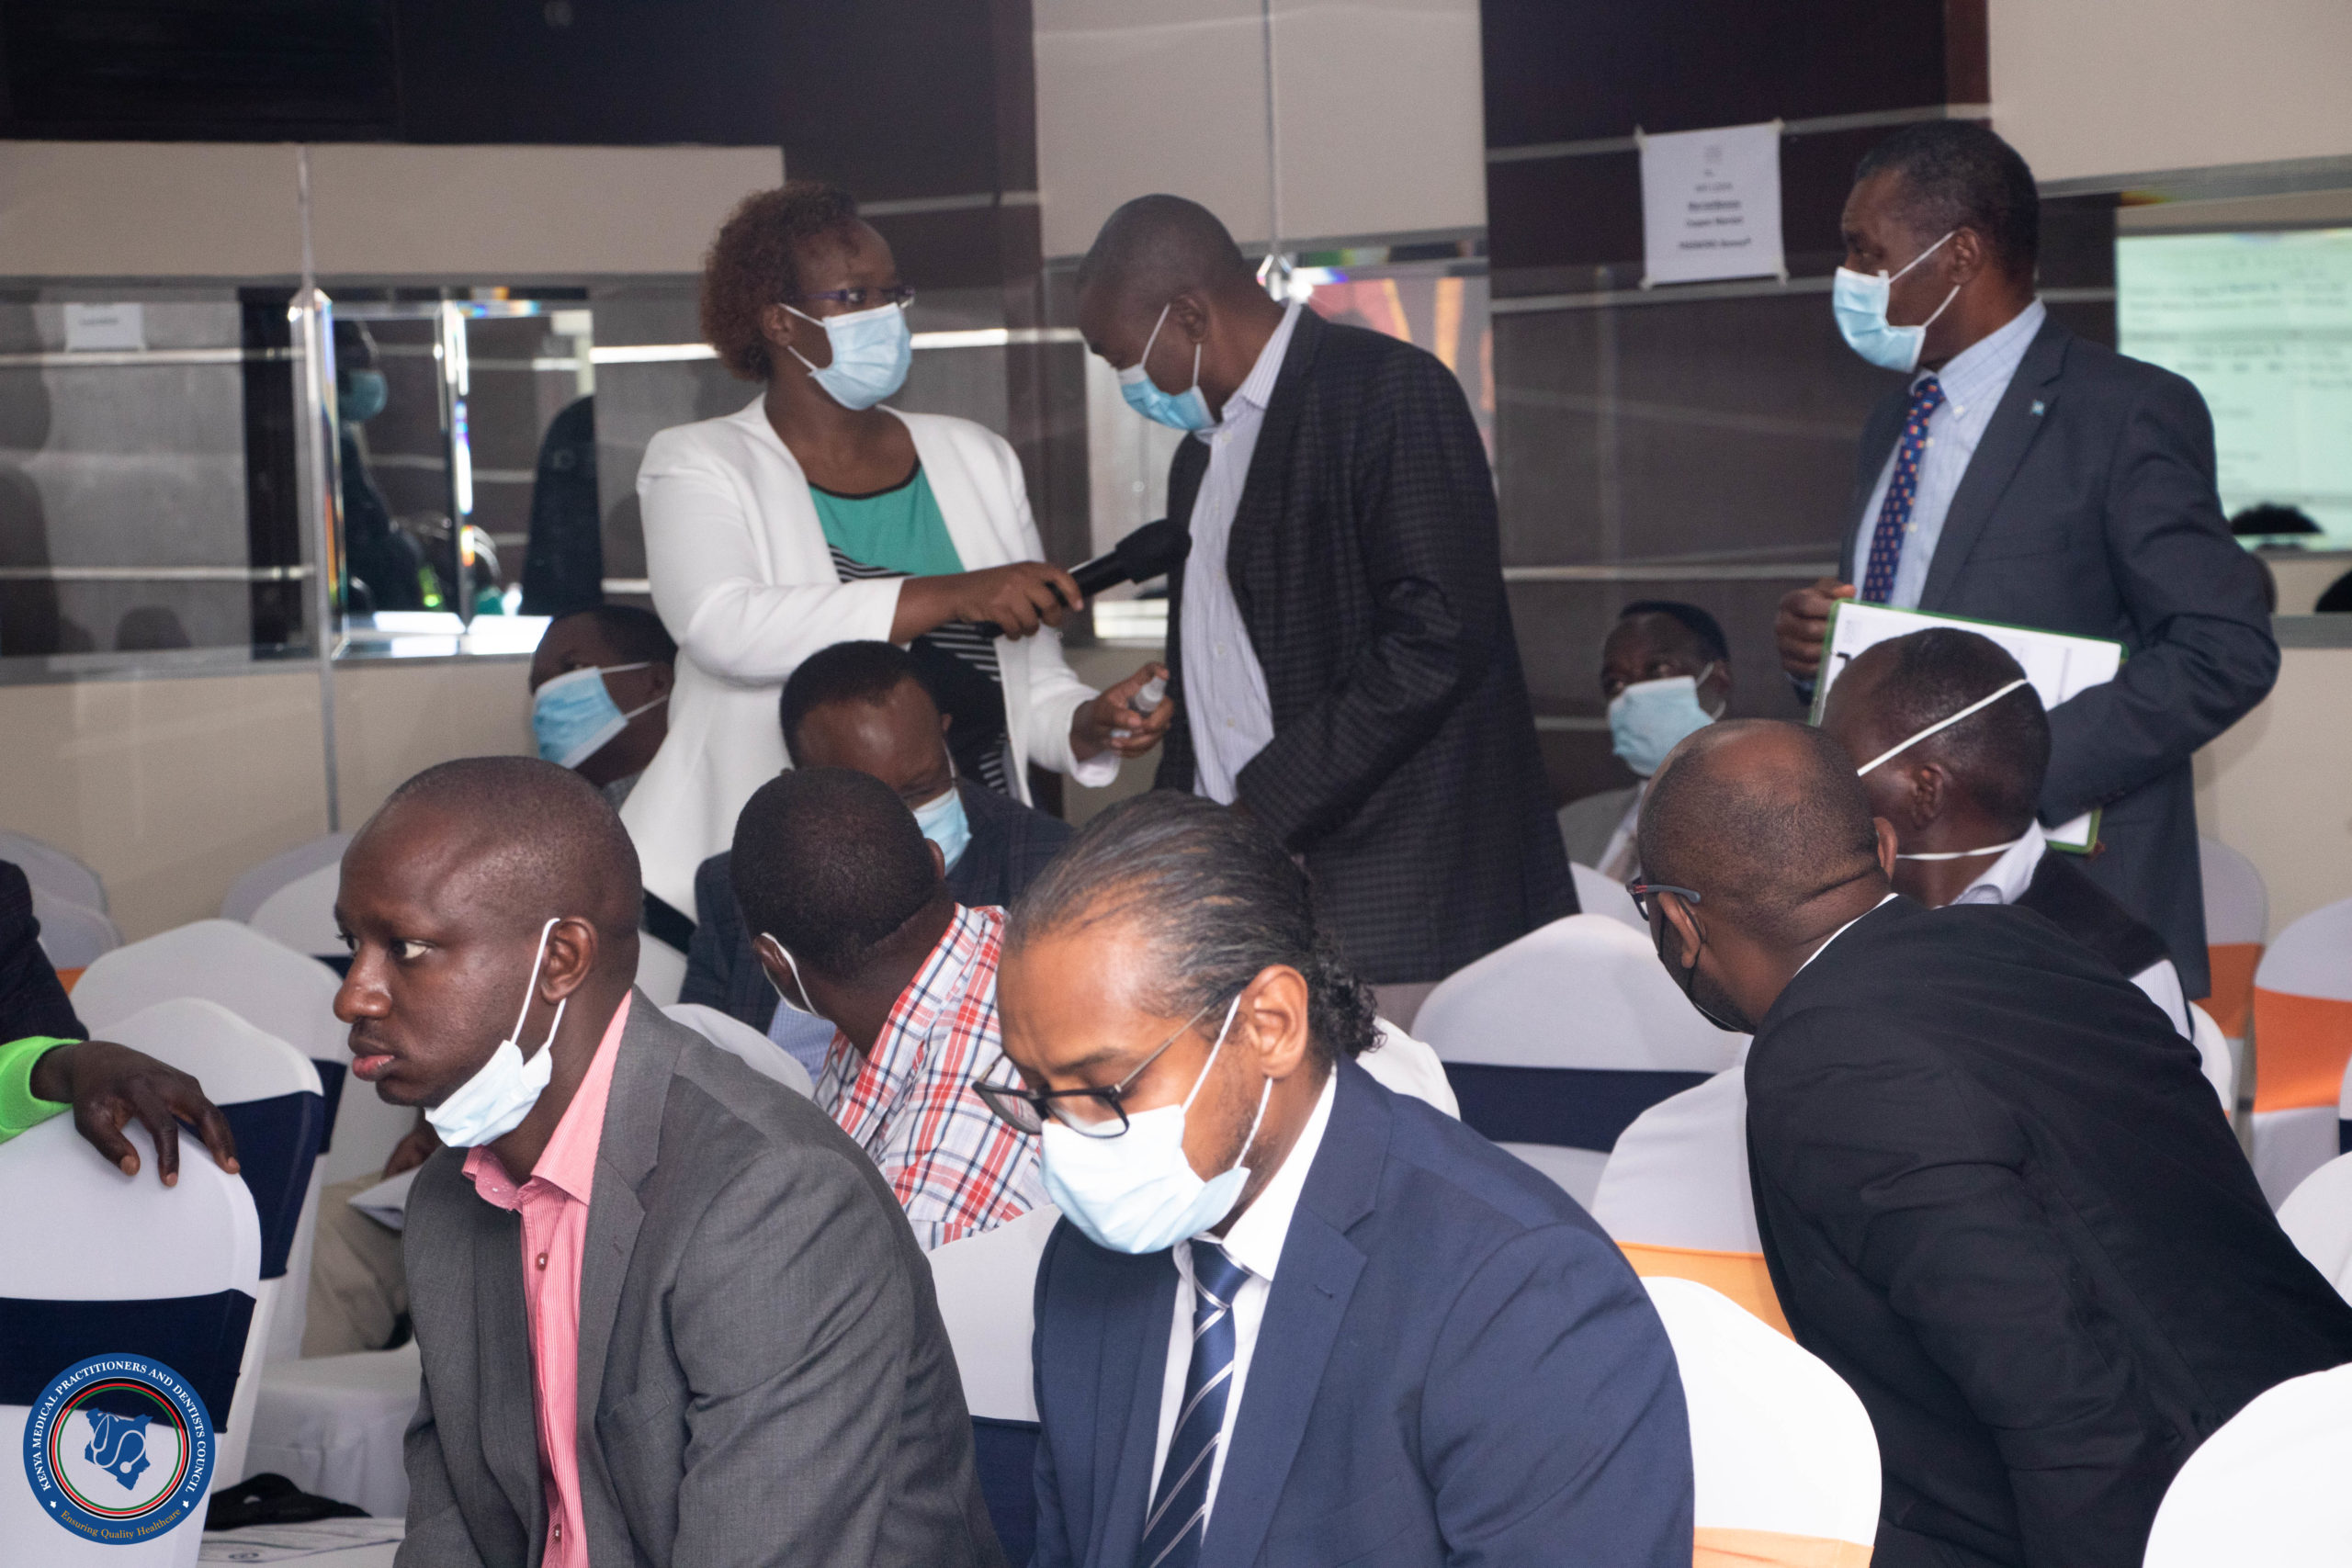 Baby Xxx 3gp - EAC Medical and Dental Boards/Councils conduct inspections in Kenya â€“ Kenya  Medical Practitioners and Dentists Council